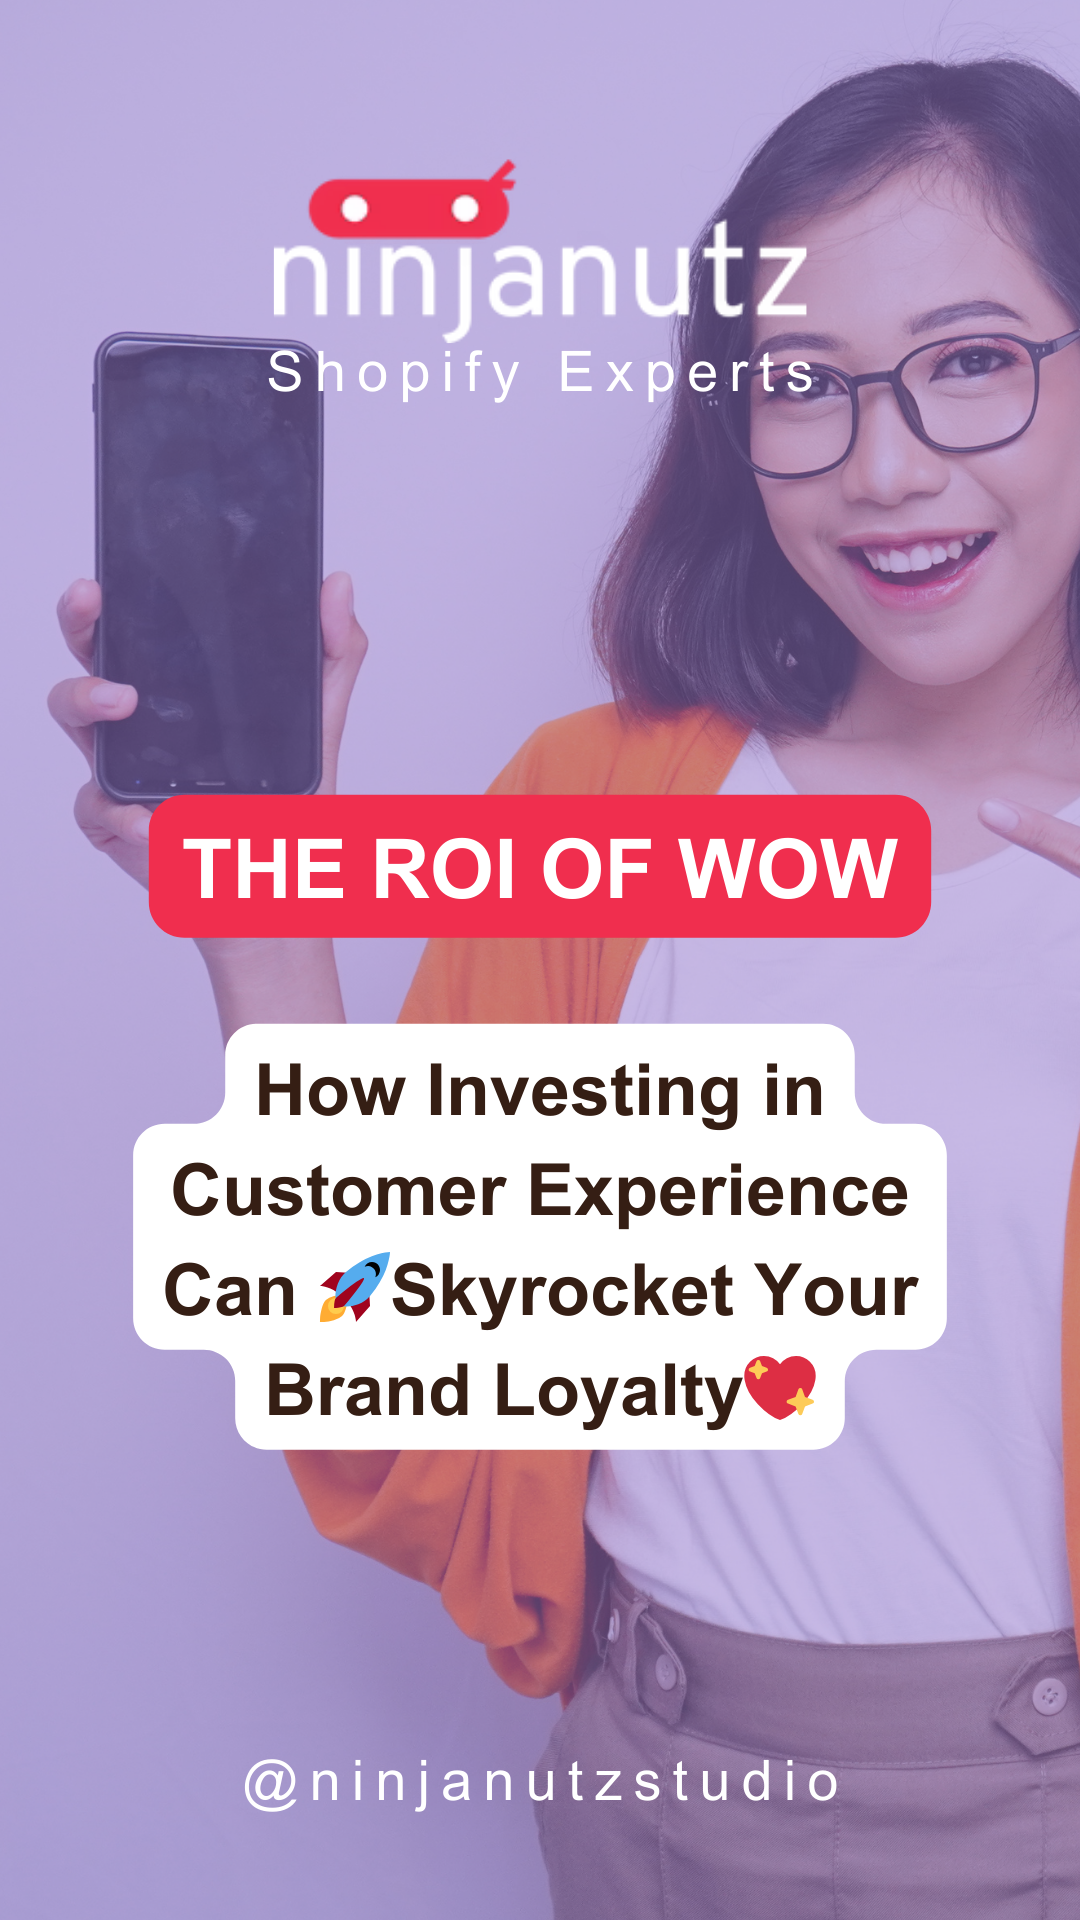 The-ROI-of-WOW-How-Investing-in-Customer-Experience-Can-Skyrocket-Your-Brand-Loyalty NinjaNutz®